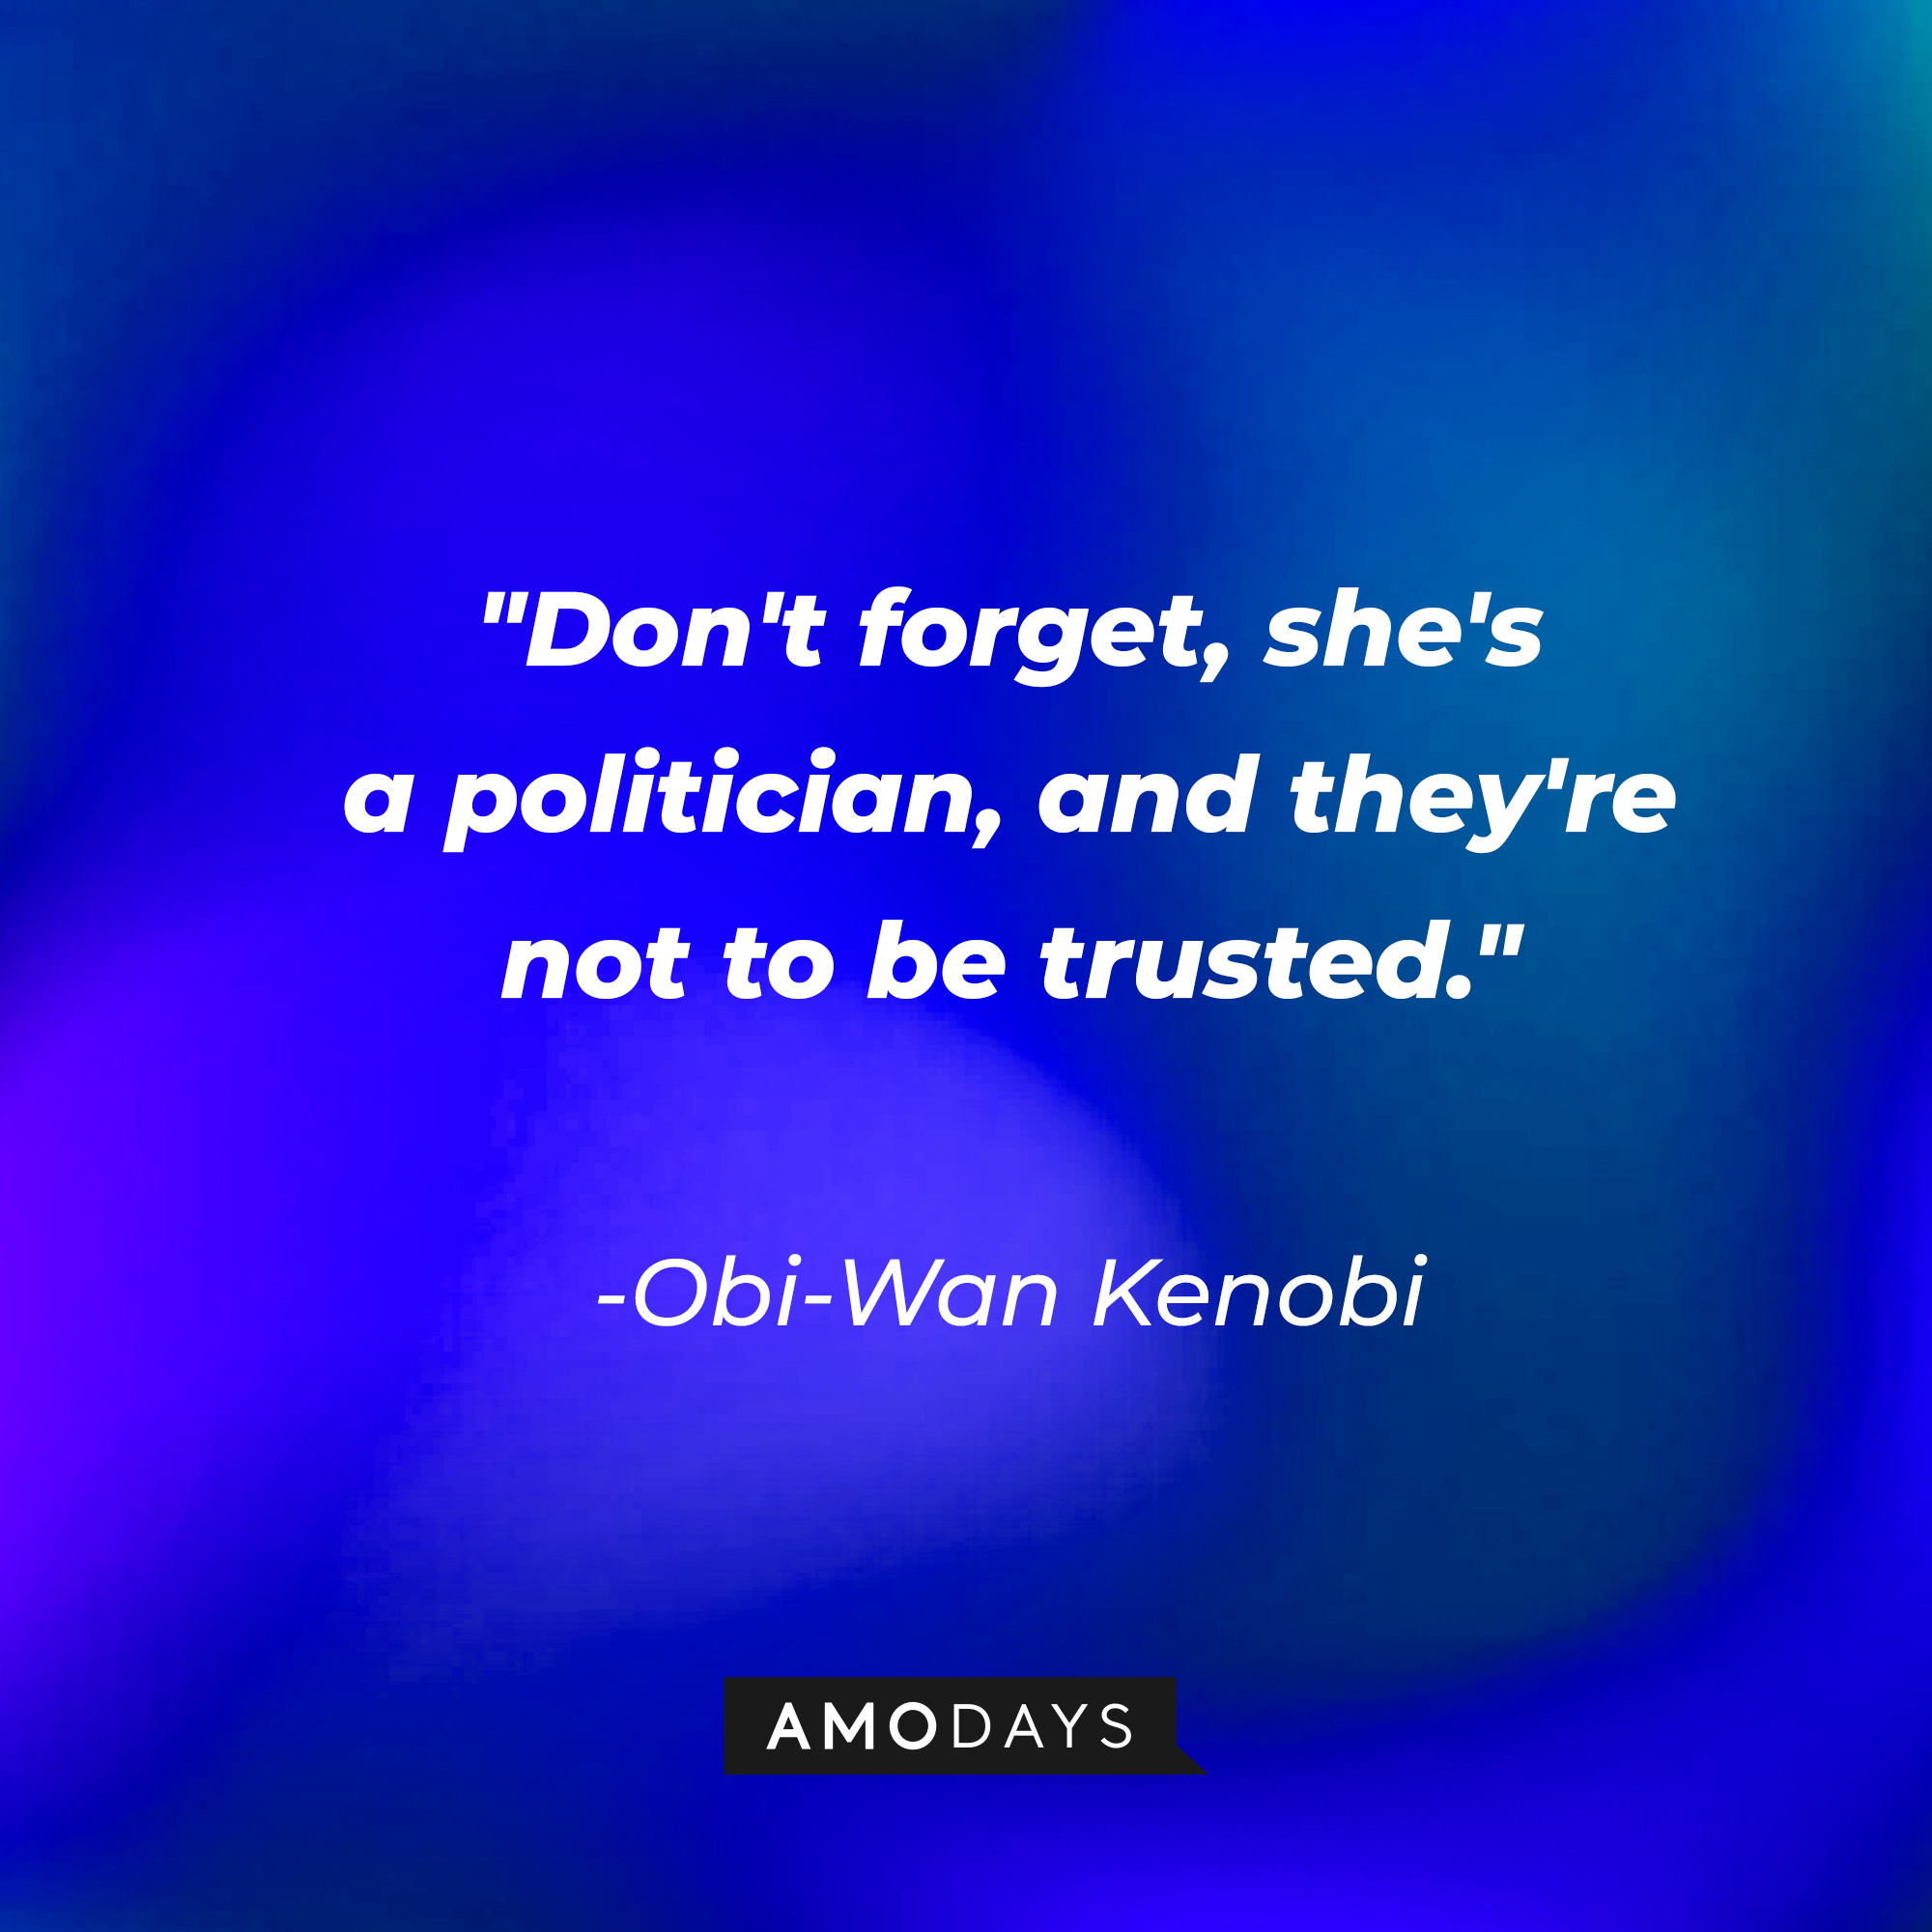 Obi-Wan Kenobi's quote: "Don't forget, she's a politician, and they're not to be trusted." | Source: AmoDays